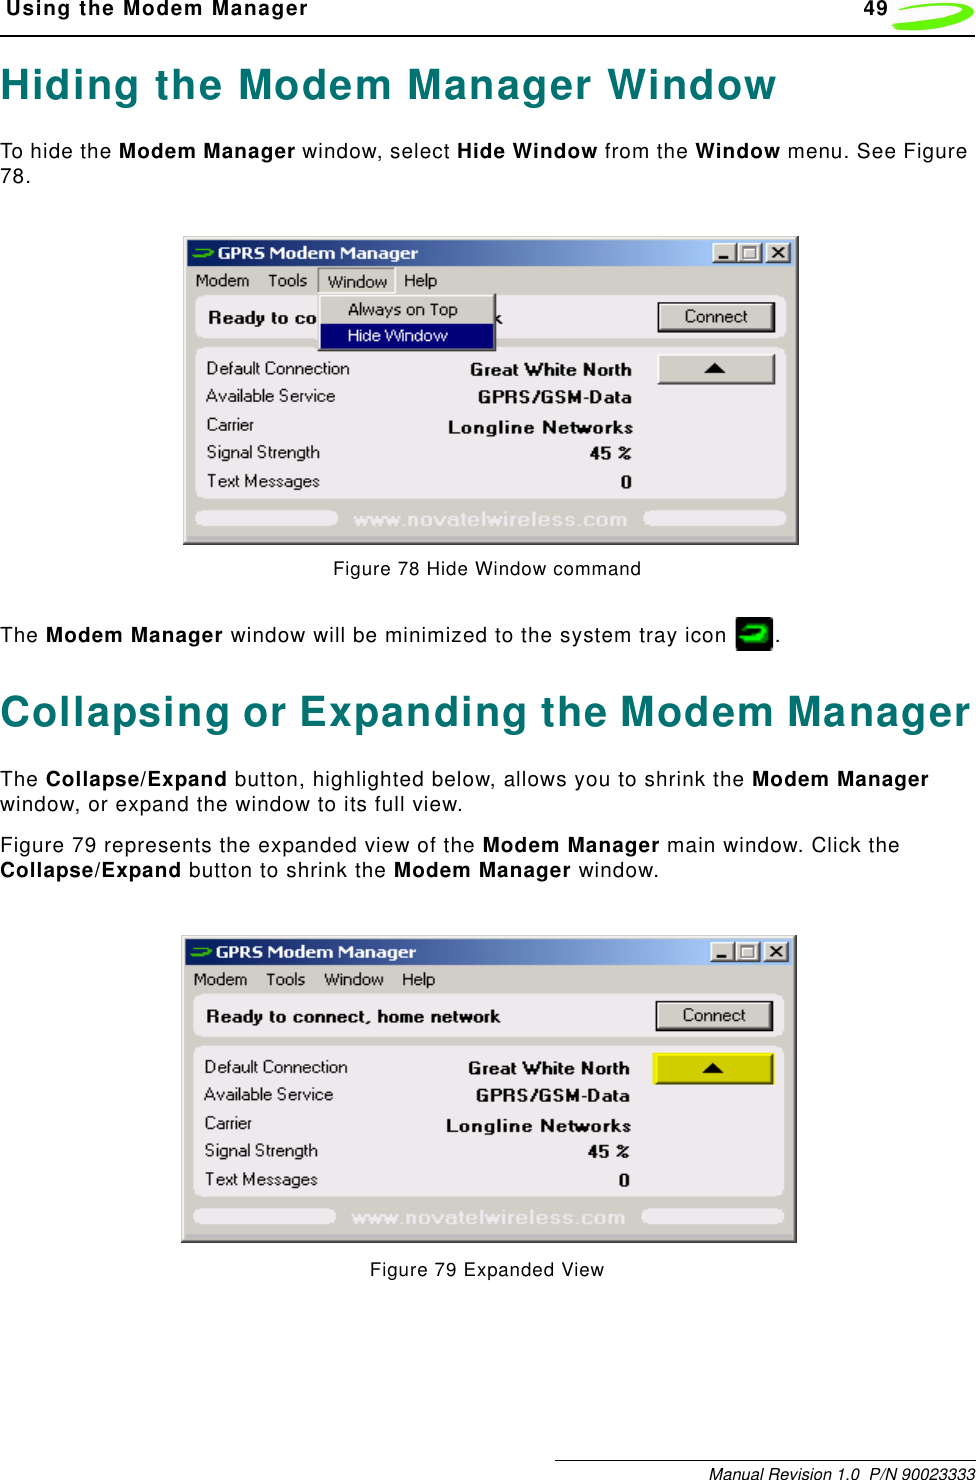  Using the Modem Manager 49Manual Revision 1.0  P/N 90023333Hiding the Modem Manager WindowTo hide the Modem Manager window, select Hide Window from the Window menu. See Figure 78.Figure 78 Hide Window commandThe Modem Manager window will be minimized to the system tray icon  .Collapsing or Expanding the Modem ManagerThe Collapse/Expand button, highlighted below, allows you to shrink the Modem Manager window, or expand the window to its full view.Figure 79 represents the expanded view of the Modem Manager main window. Click the Collapse/Expand button to shrink the Modem Manager window.Figure 79 Expanded View